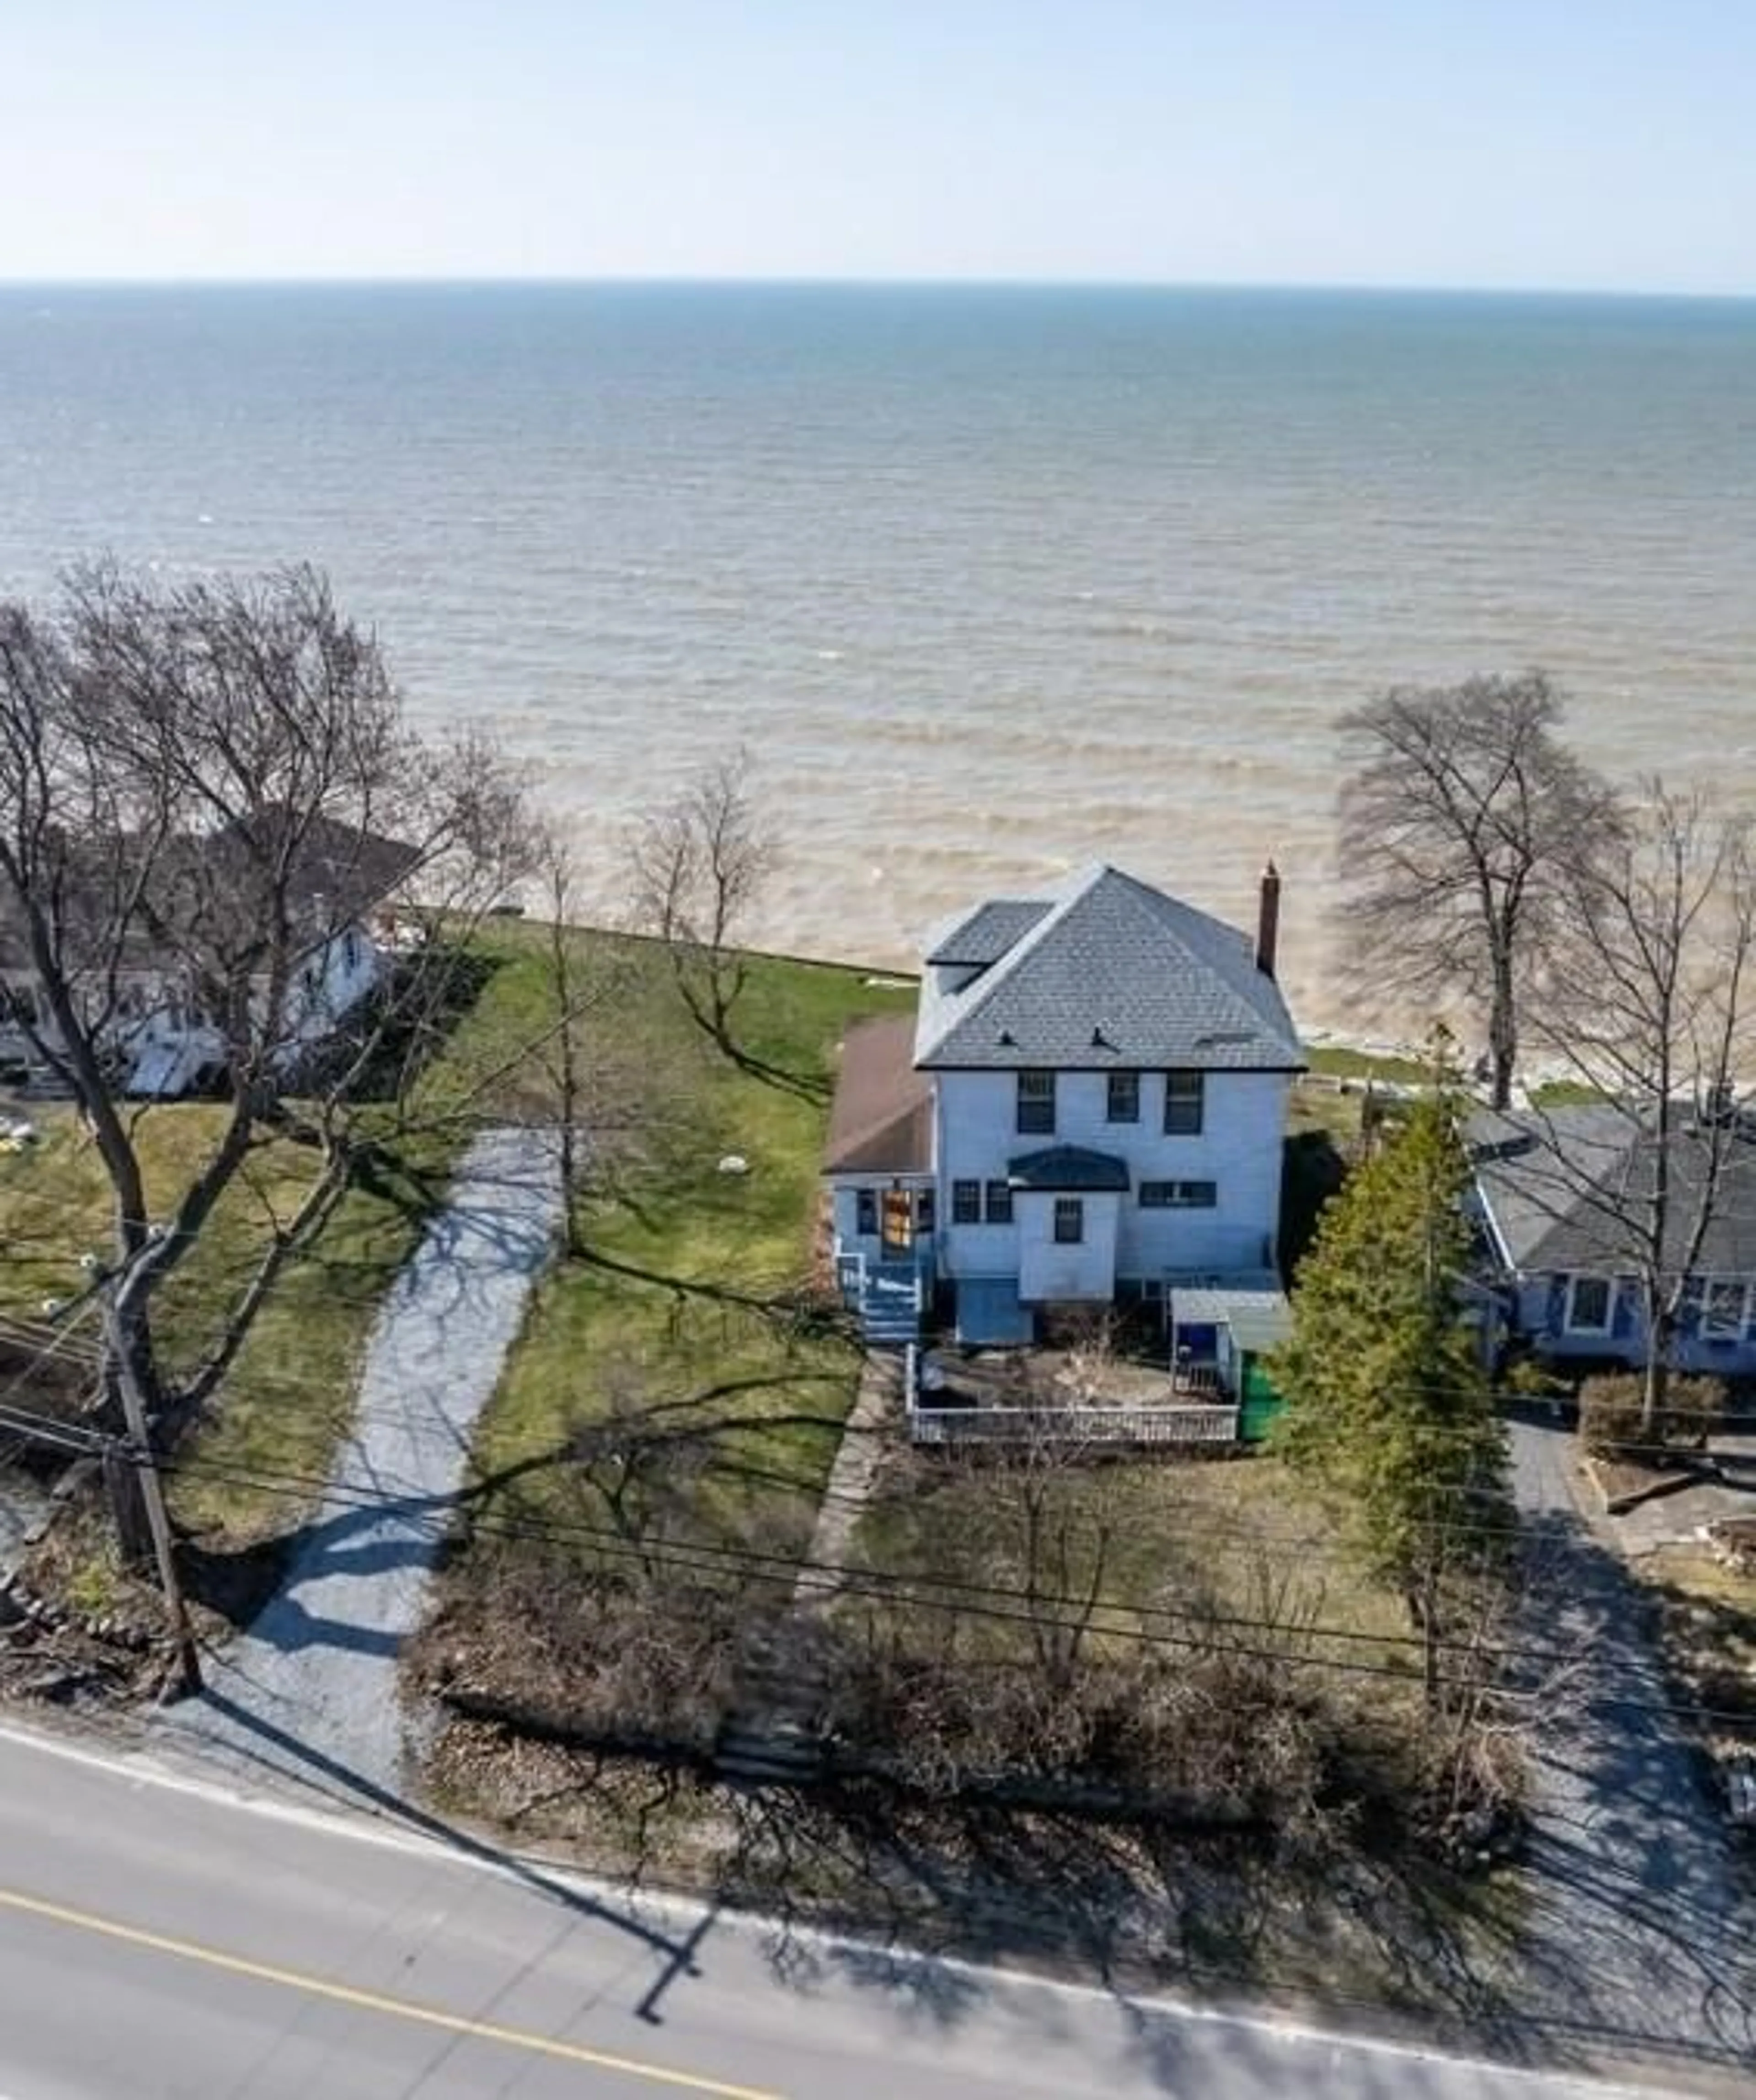 Lakeview for 13171 LAKESHORE Rd, Wainfleet Ontario L0S 1V0